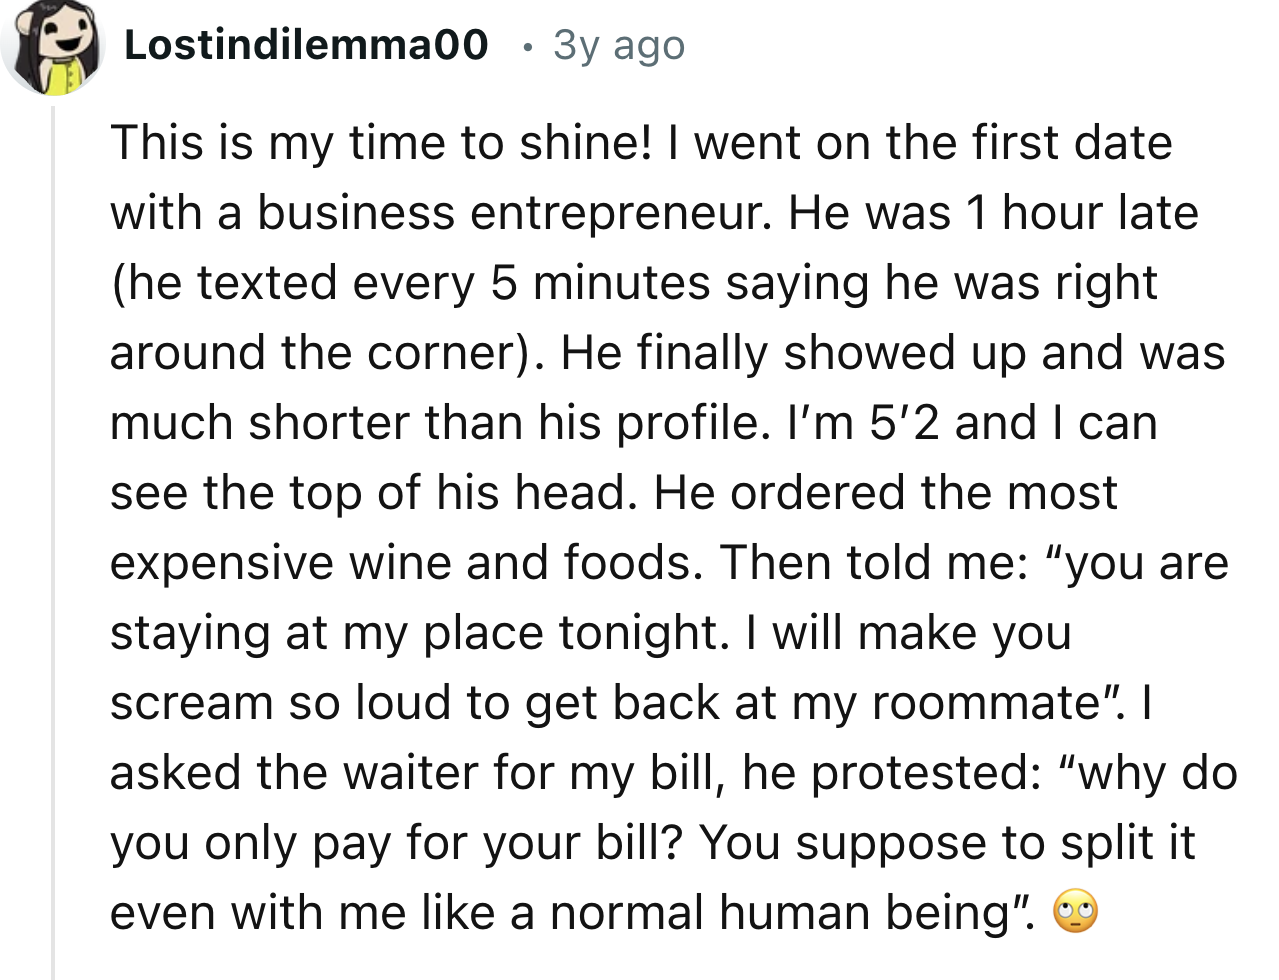 screenshot - Lostindilemma00 3y ago This is my time to shine! I went on the first date with a business entrepreneur. He was 1 hour late he texted every 5 minutes saying he was right around the corner. He finally showed up and was much shorter than his pro